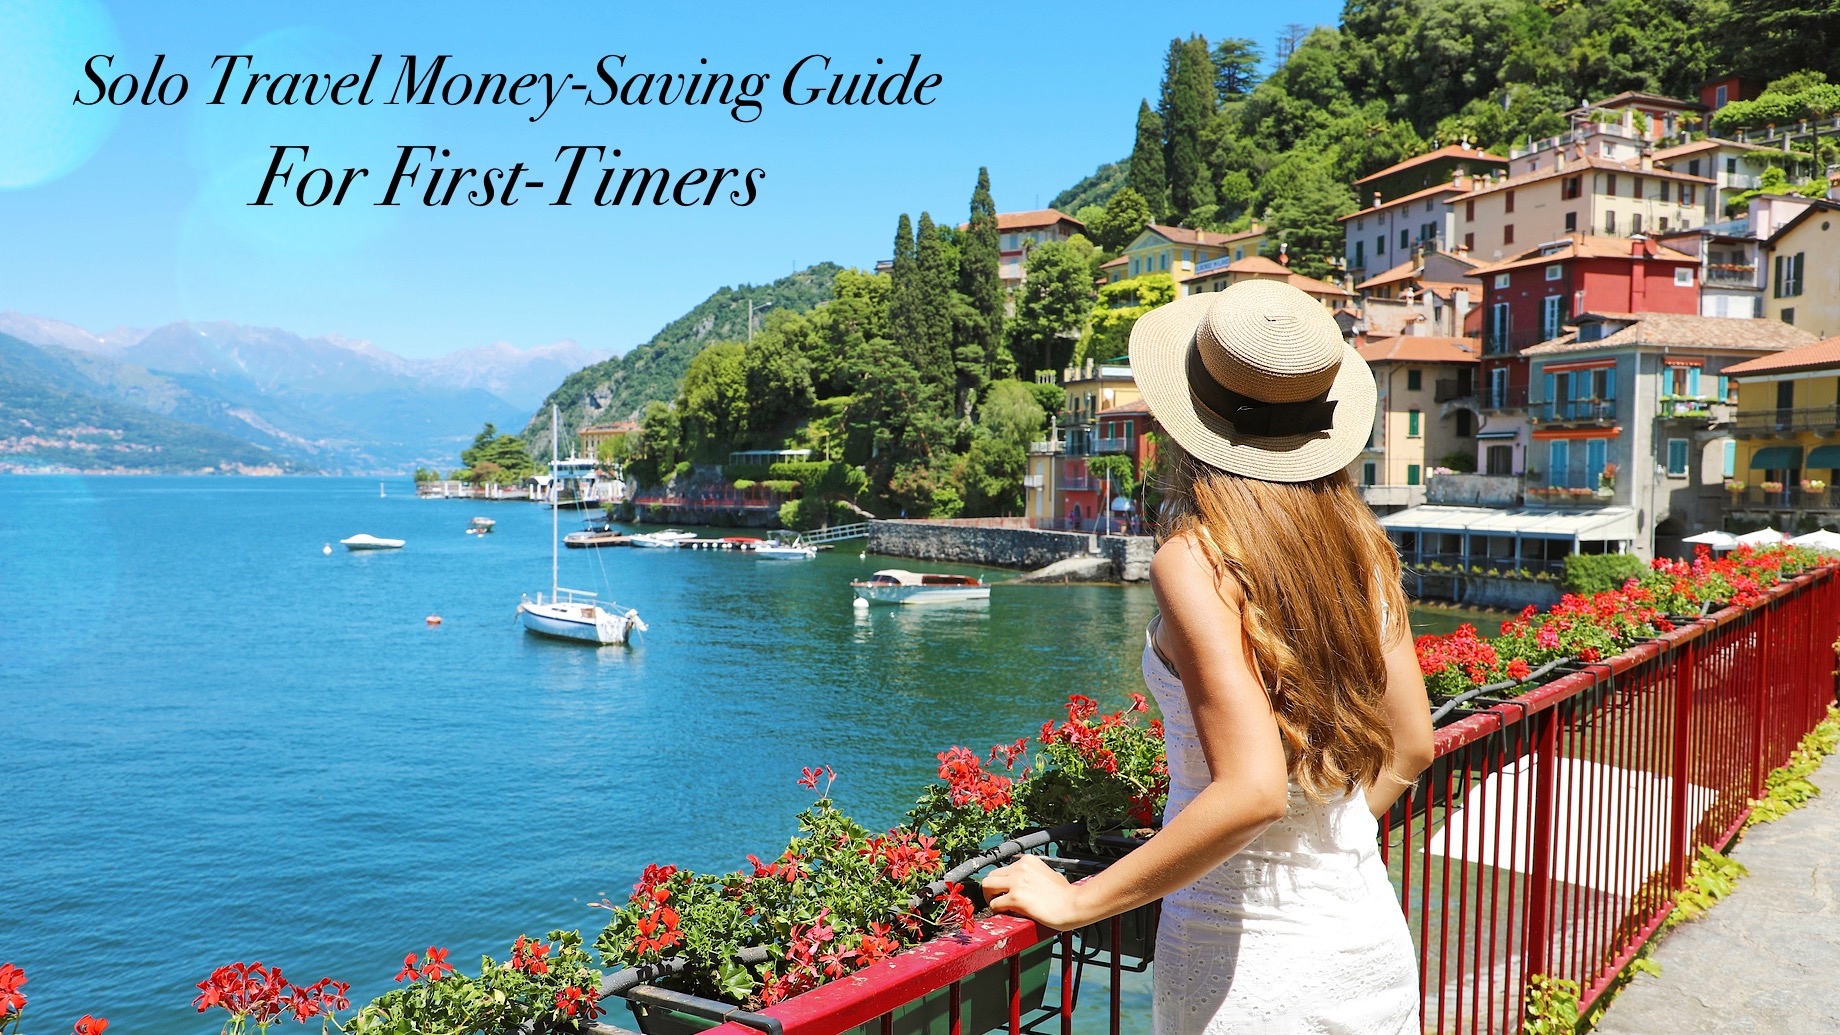 Solo Travel Money-Saving Guide For First-Timers